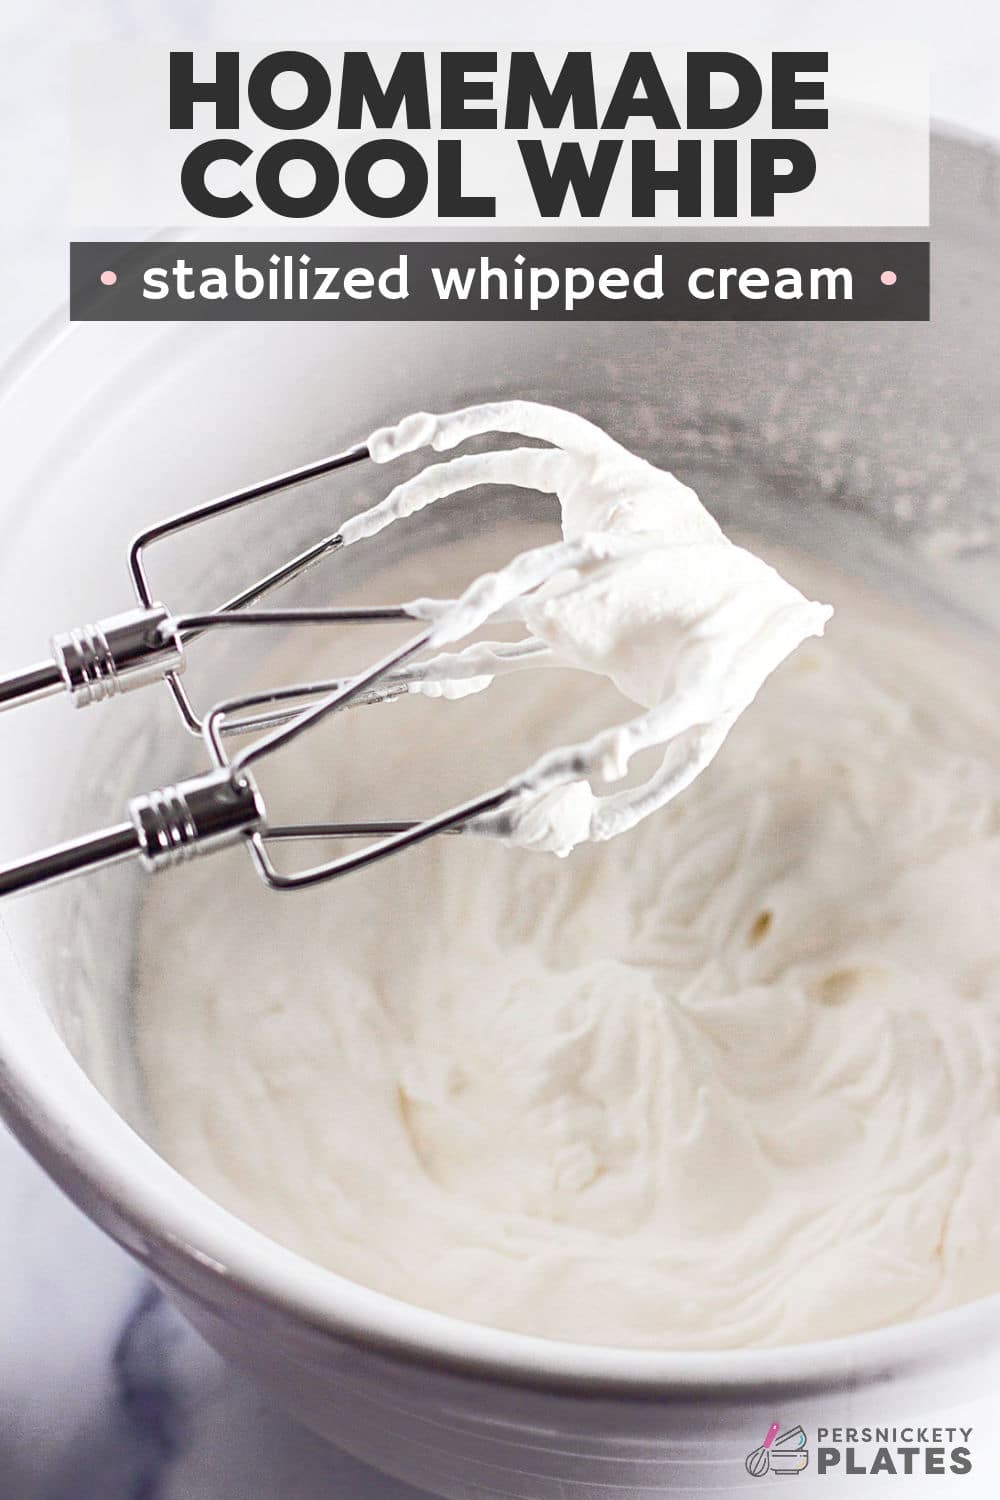 Easy homemade cool whip (stabilized whipped cream) is a simple way to add a touch of elegance to all your favorite desserts and hot drinks! This pure white, light, and airy cream holds its shape like a traditional tub of cool whip but has the simple ingredients of a classic whipped cream. Use it on everything from fresh fruit and pancakes to piping over cakes, pies, and milkshakes!  | www.persnicketyplates.com